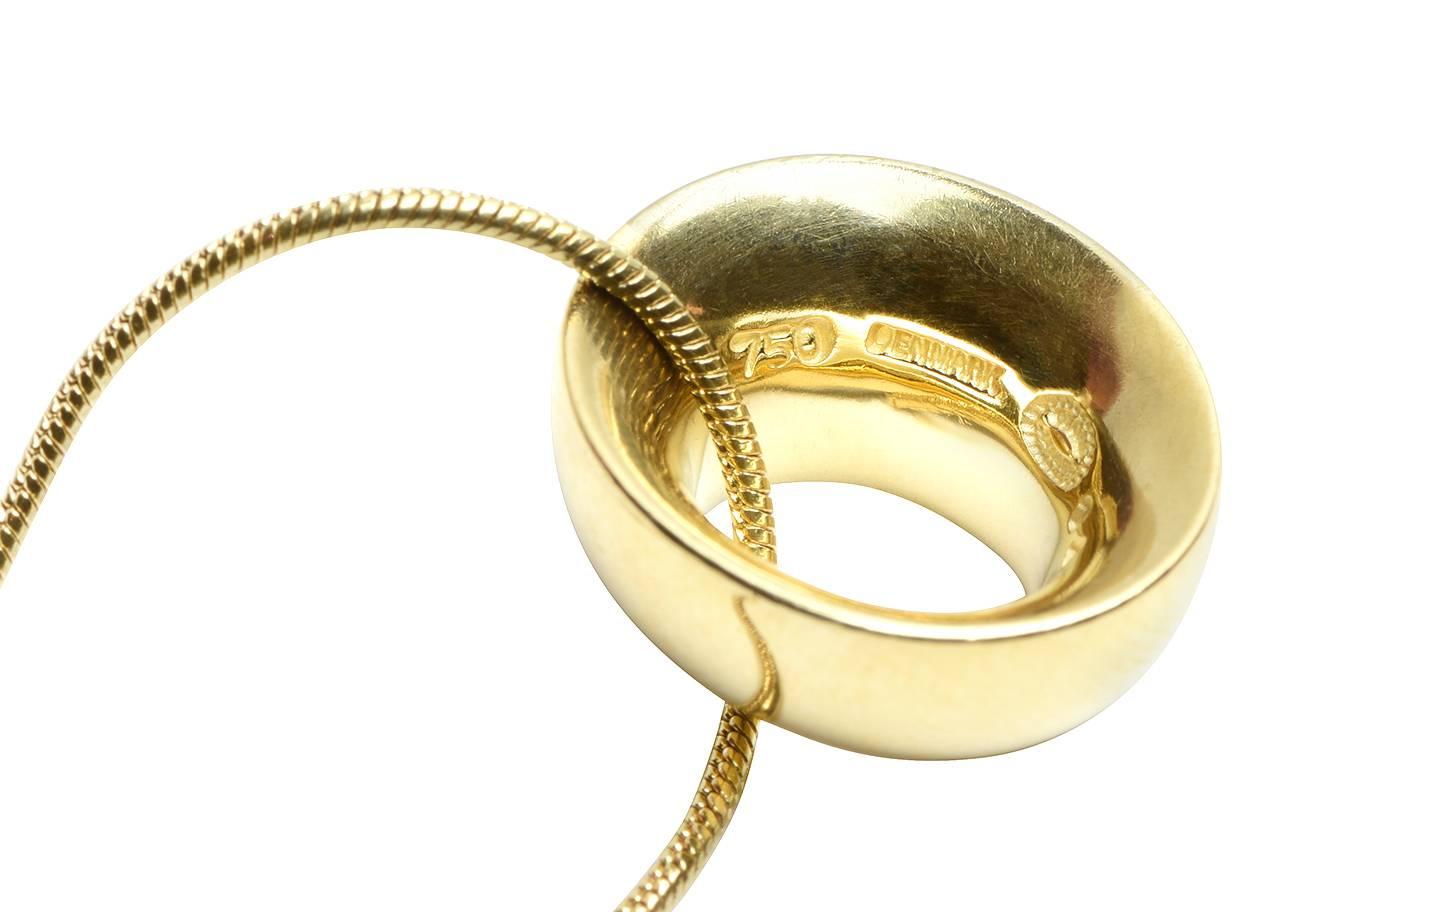 A very simple yet elegant piece made by famous designer Georg Jensen. The pendant is an oval shaped curved edge disc suspended from a snake chain in 18k yellow gold.

Signature: Georg Jensen
Hallmark: 750 Denmark
Measurement: 18.00 inches